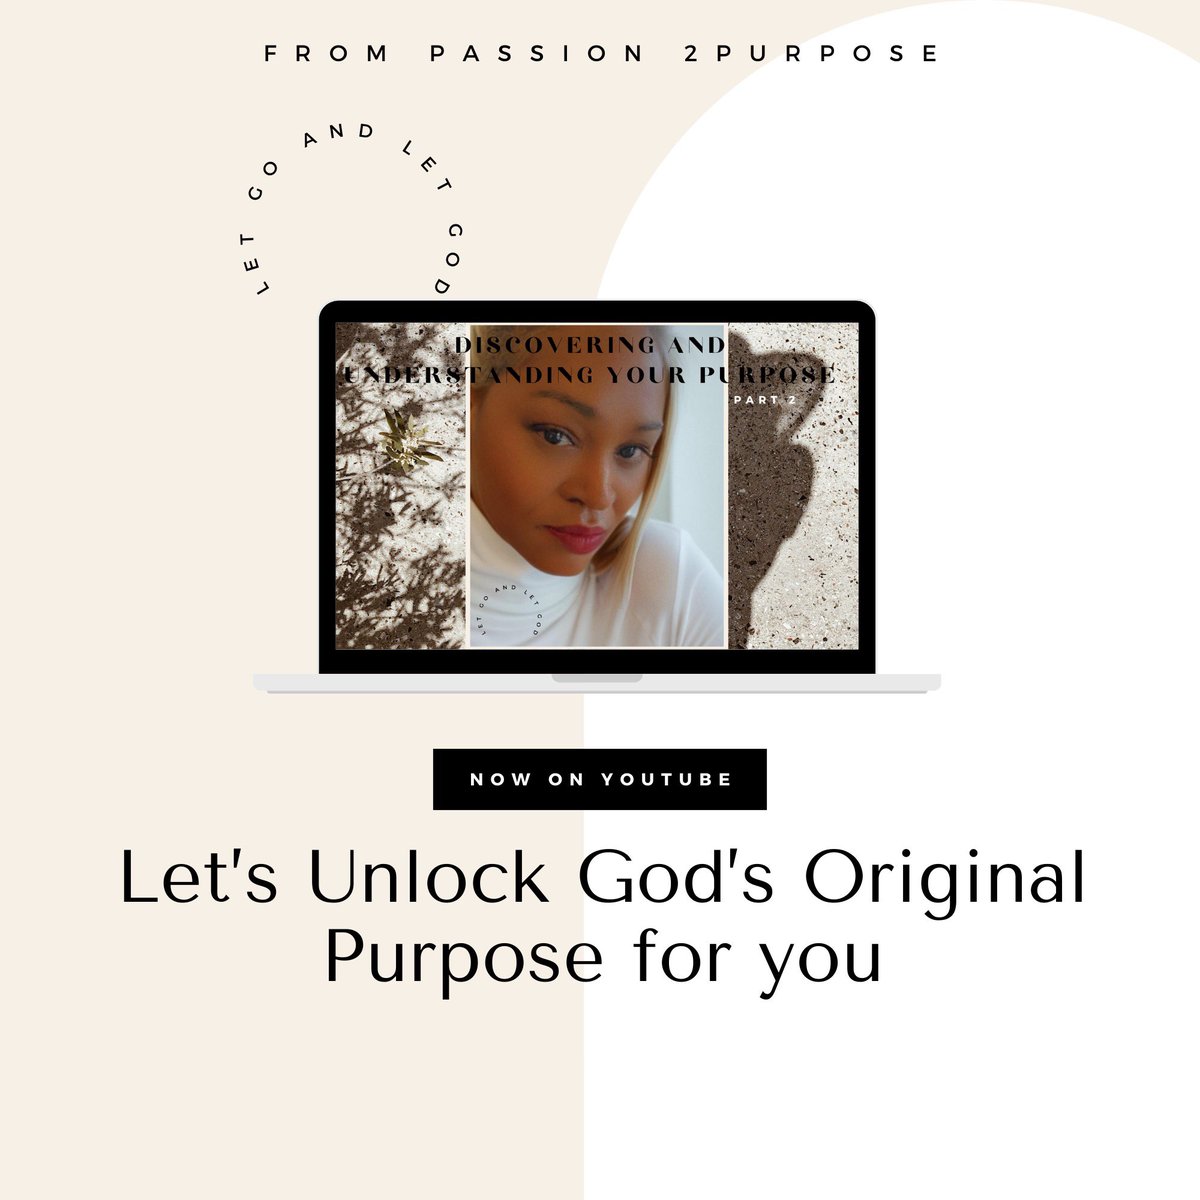 🌈✨ Grand Rising Brothers  and Sisters, Your  purpose is awaiting ! Tap into it …let’s discover who you're meant to be with our latest YouTube video , Let's ignite your journey today! 🔥 #PathToPurpose  #Frompassion2purpose 
#BeYourBestSelf
#DiscoverYourPath
#Empower